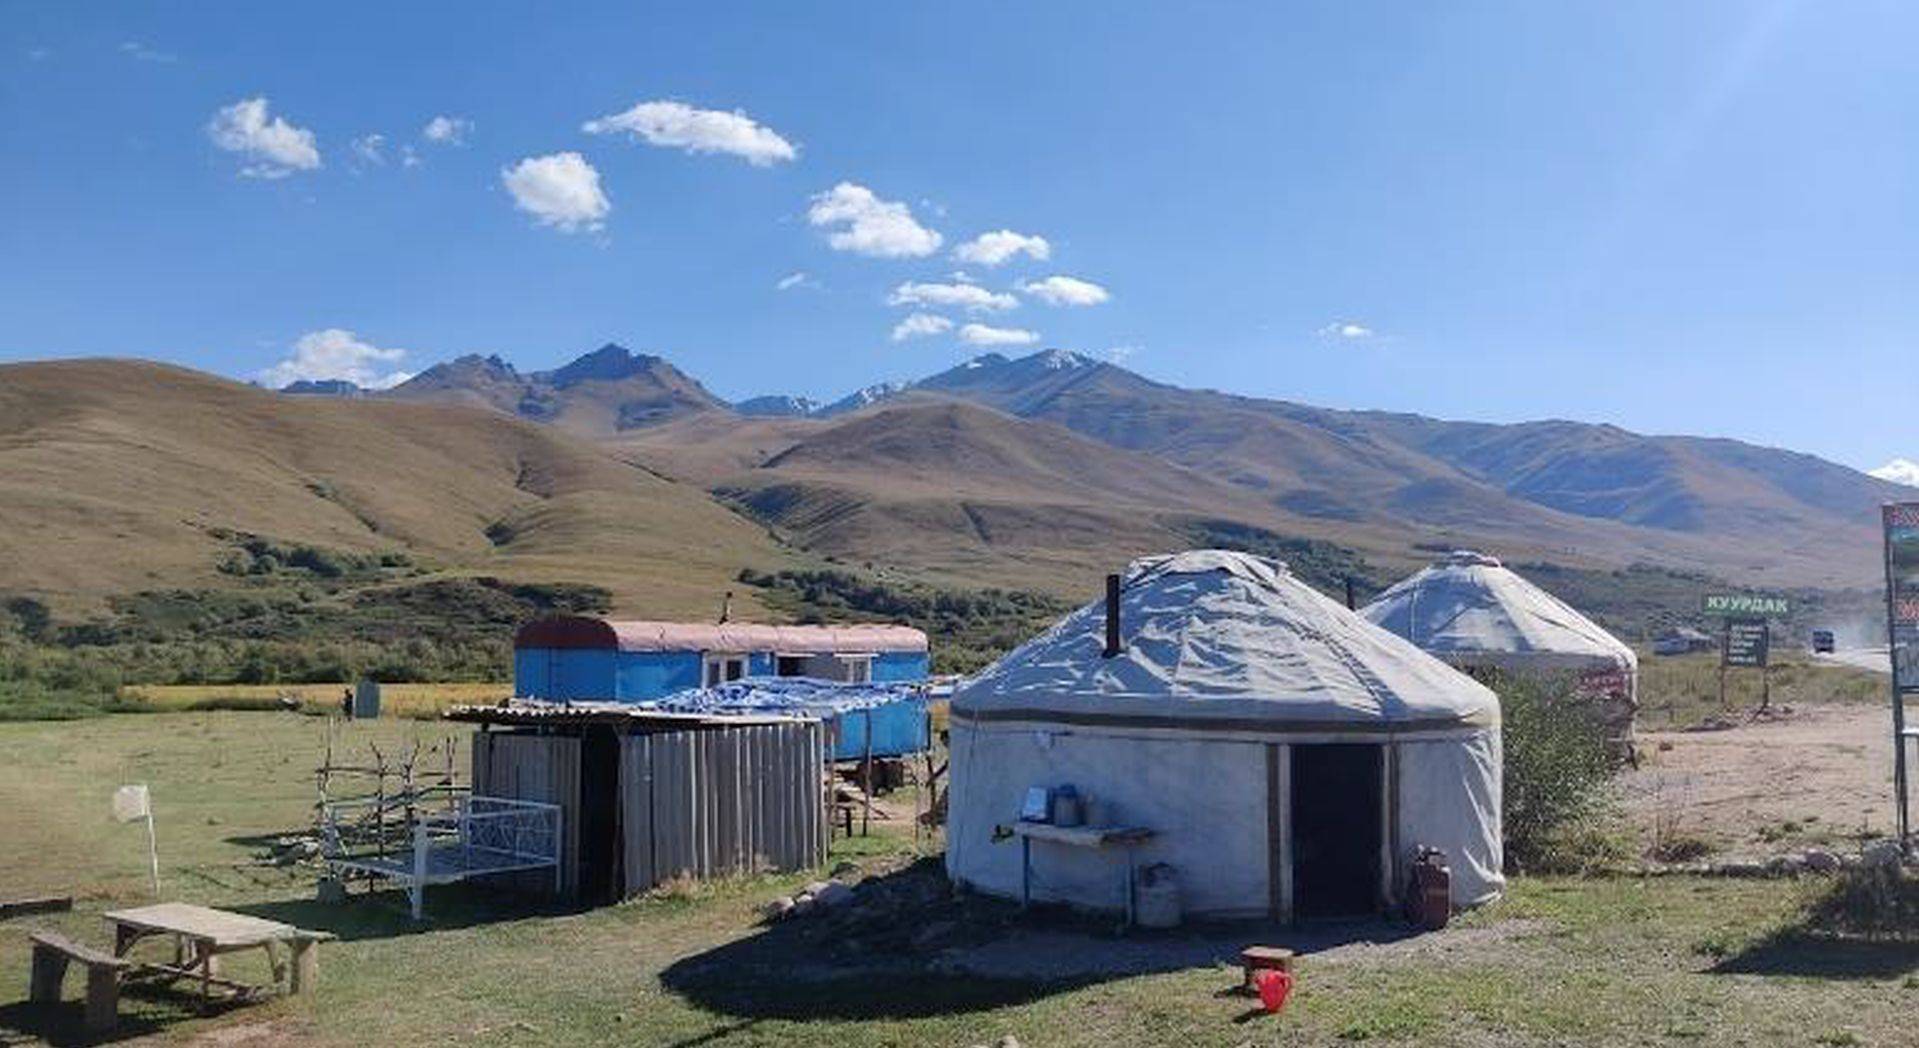 Yurts in the steppe